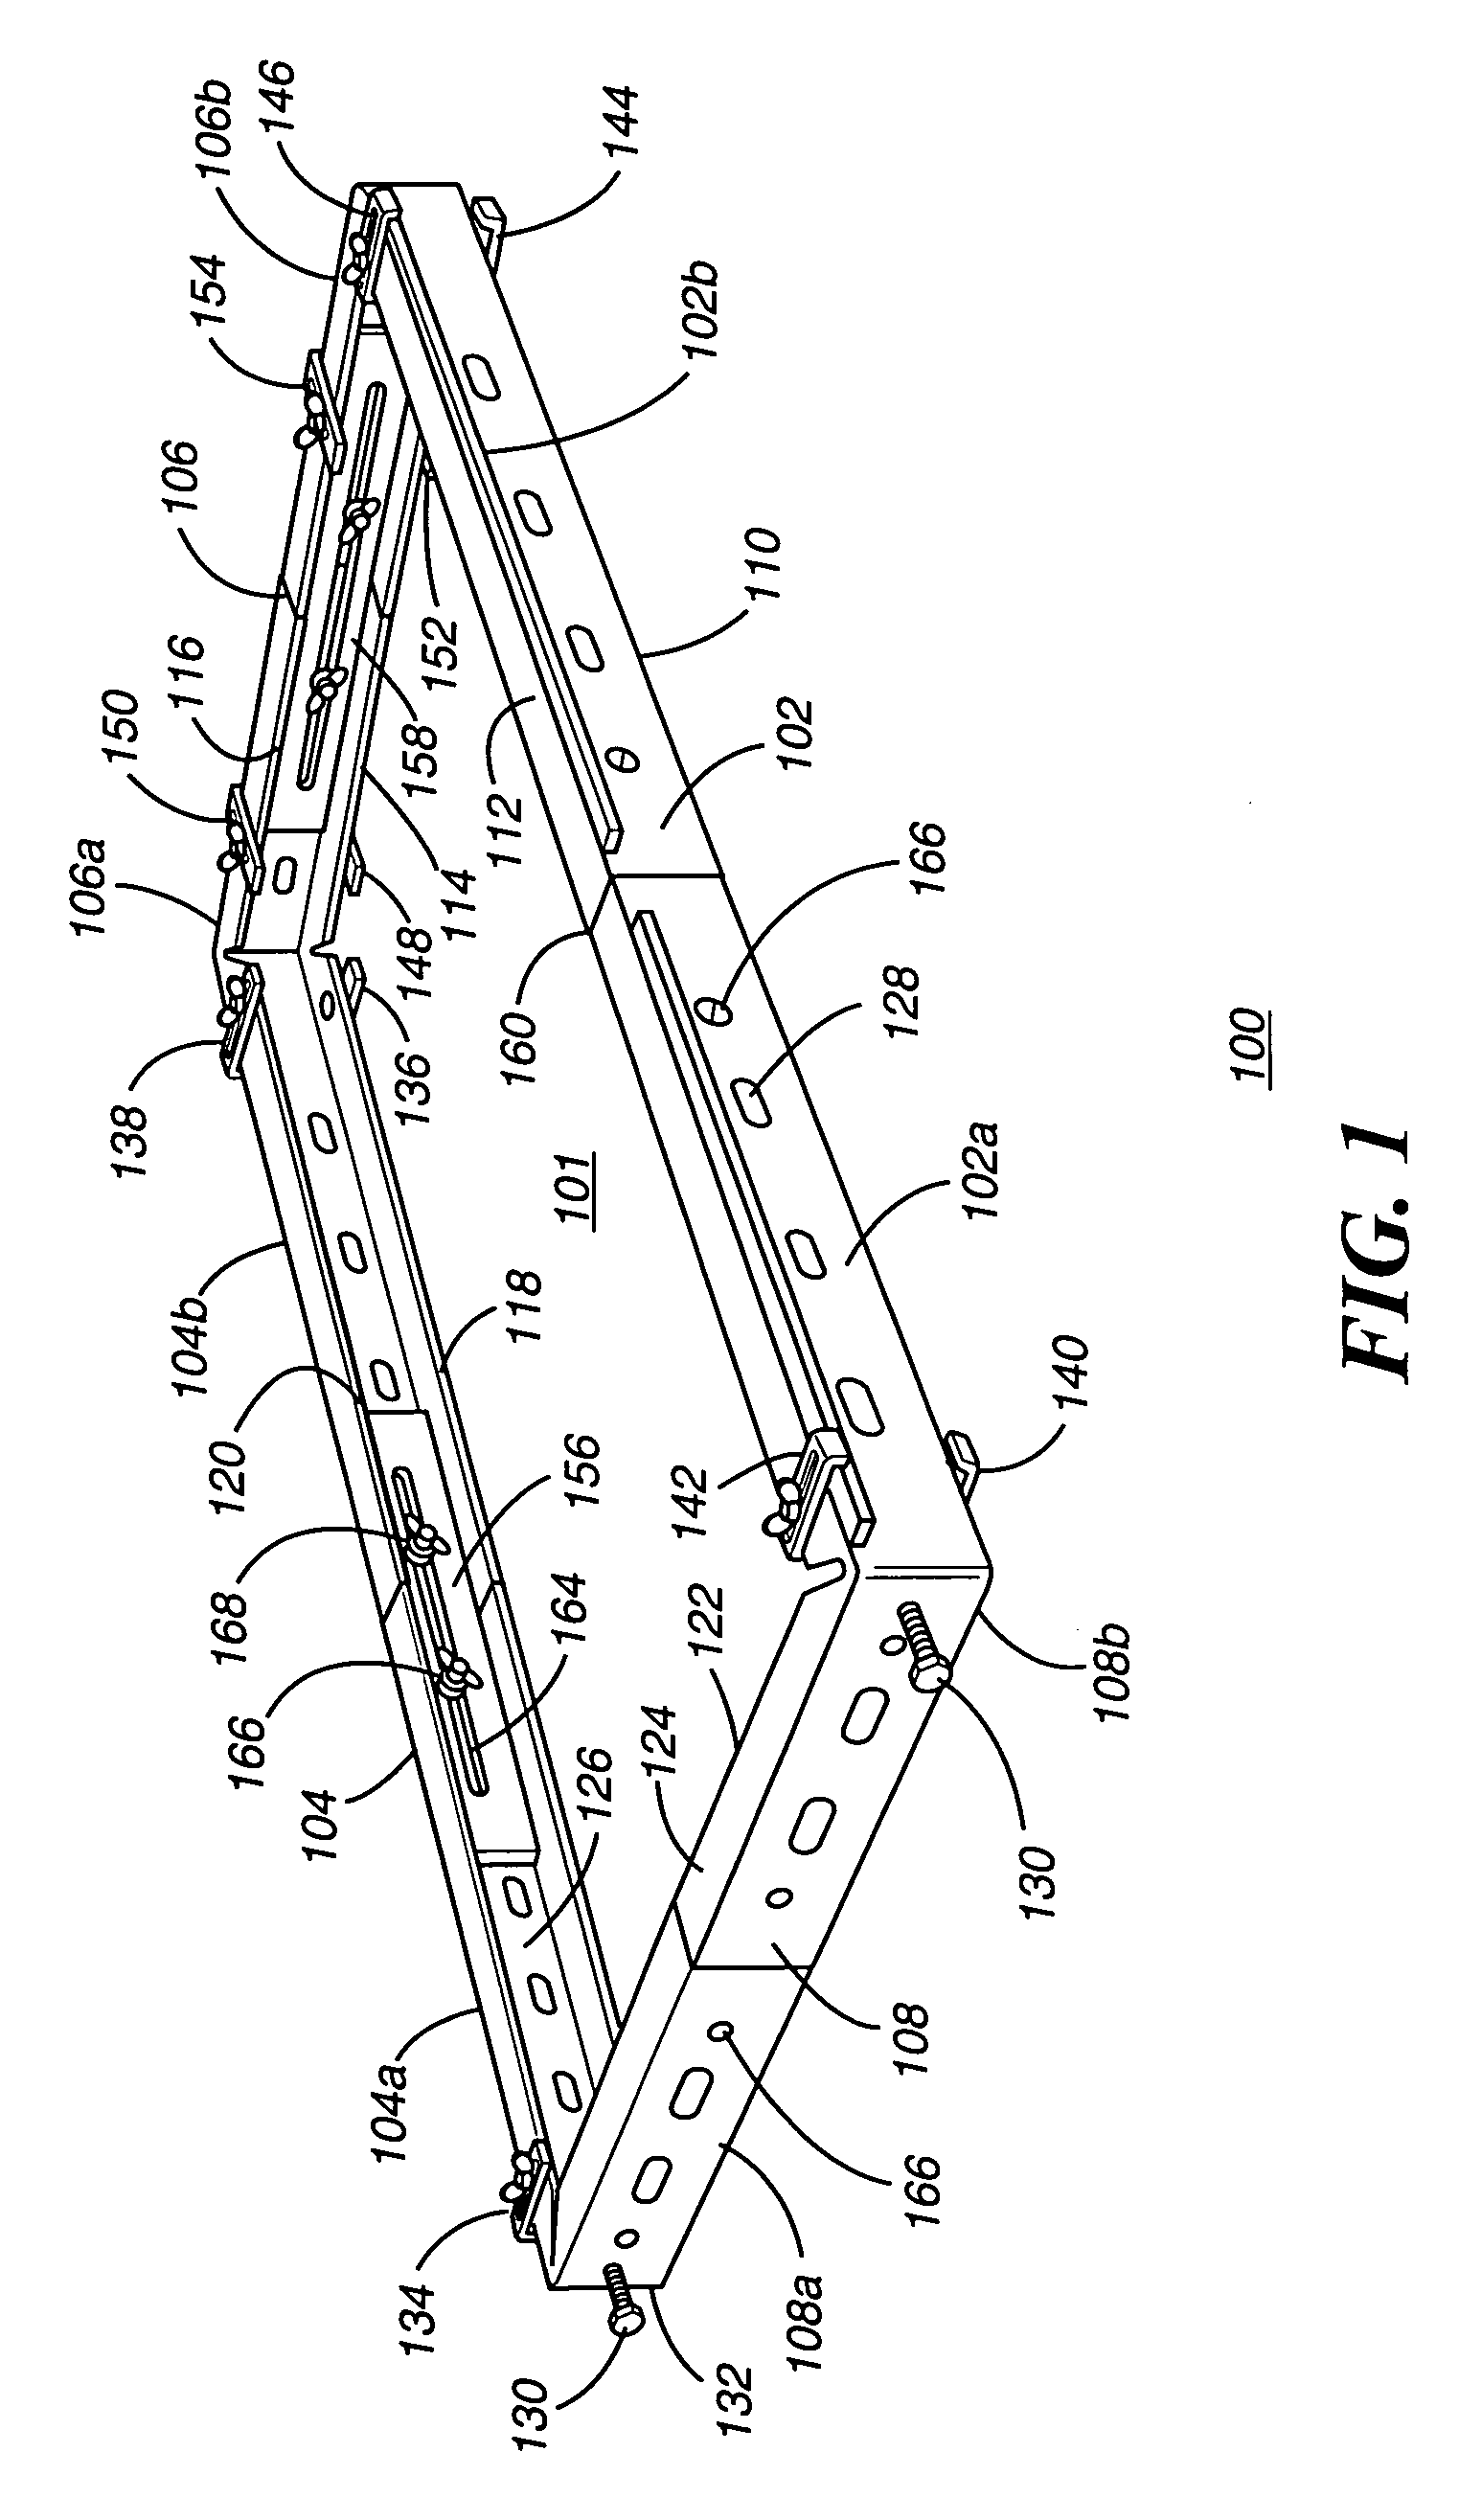 Device for installing a pre-hung door